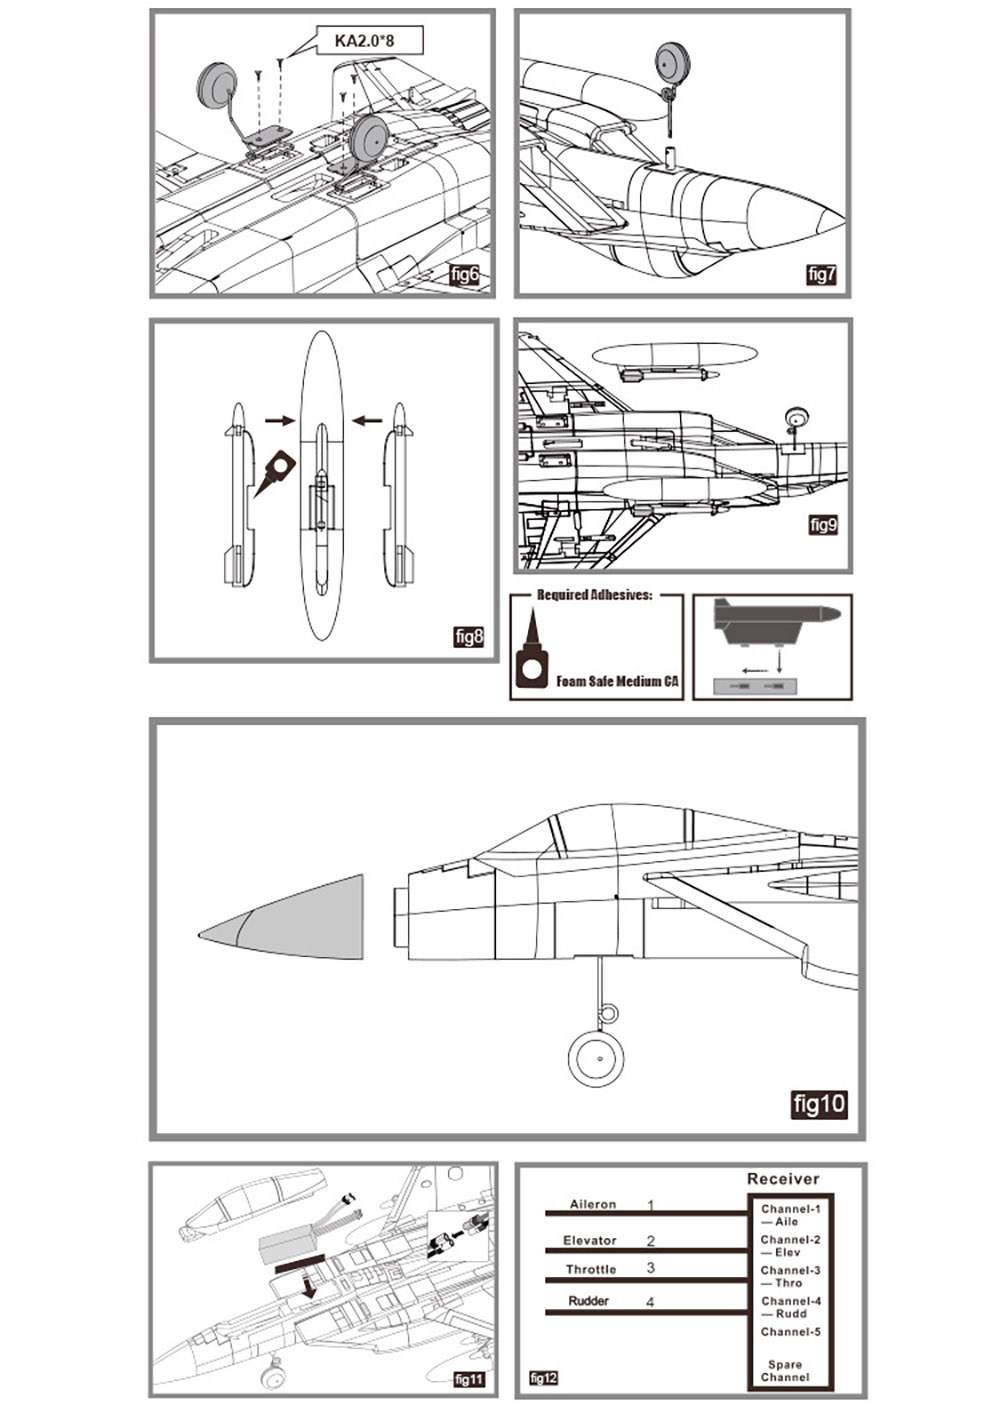 FMS-F15-Eagle-V2-715mm-Wingspan-64mm-Ducted-Fan-Aircrafts-EPO-RC-Airplane-PNP-1773282-6